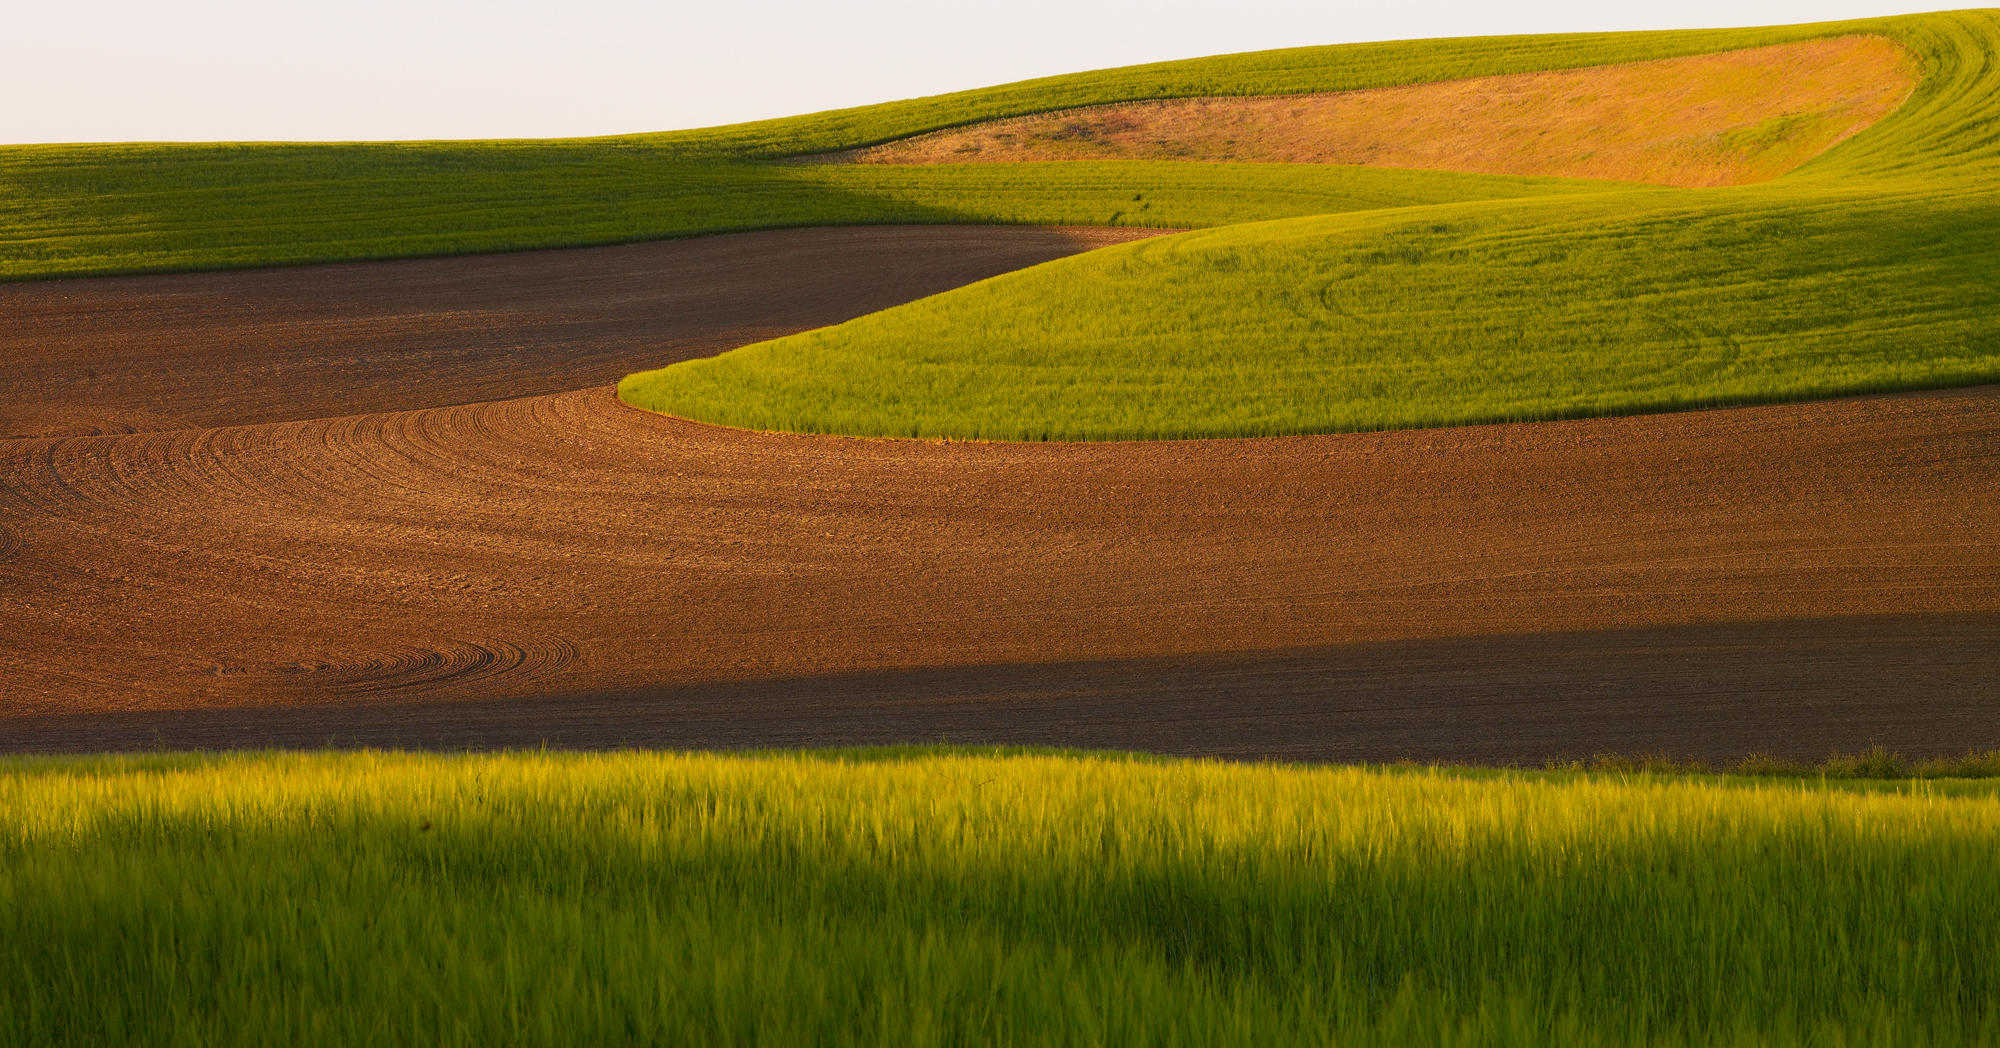 Plowed fields and growing wheat are all about the spring trips. Be ready for lots of green.